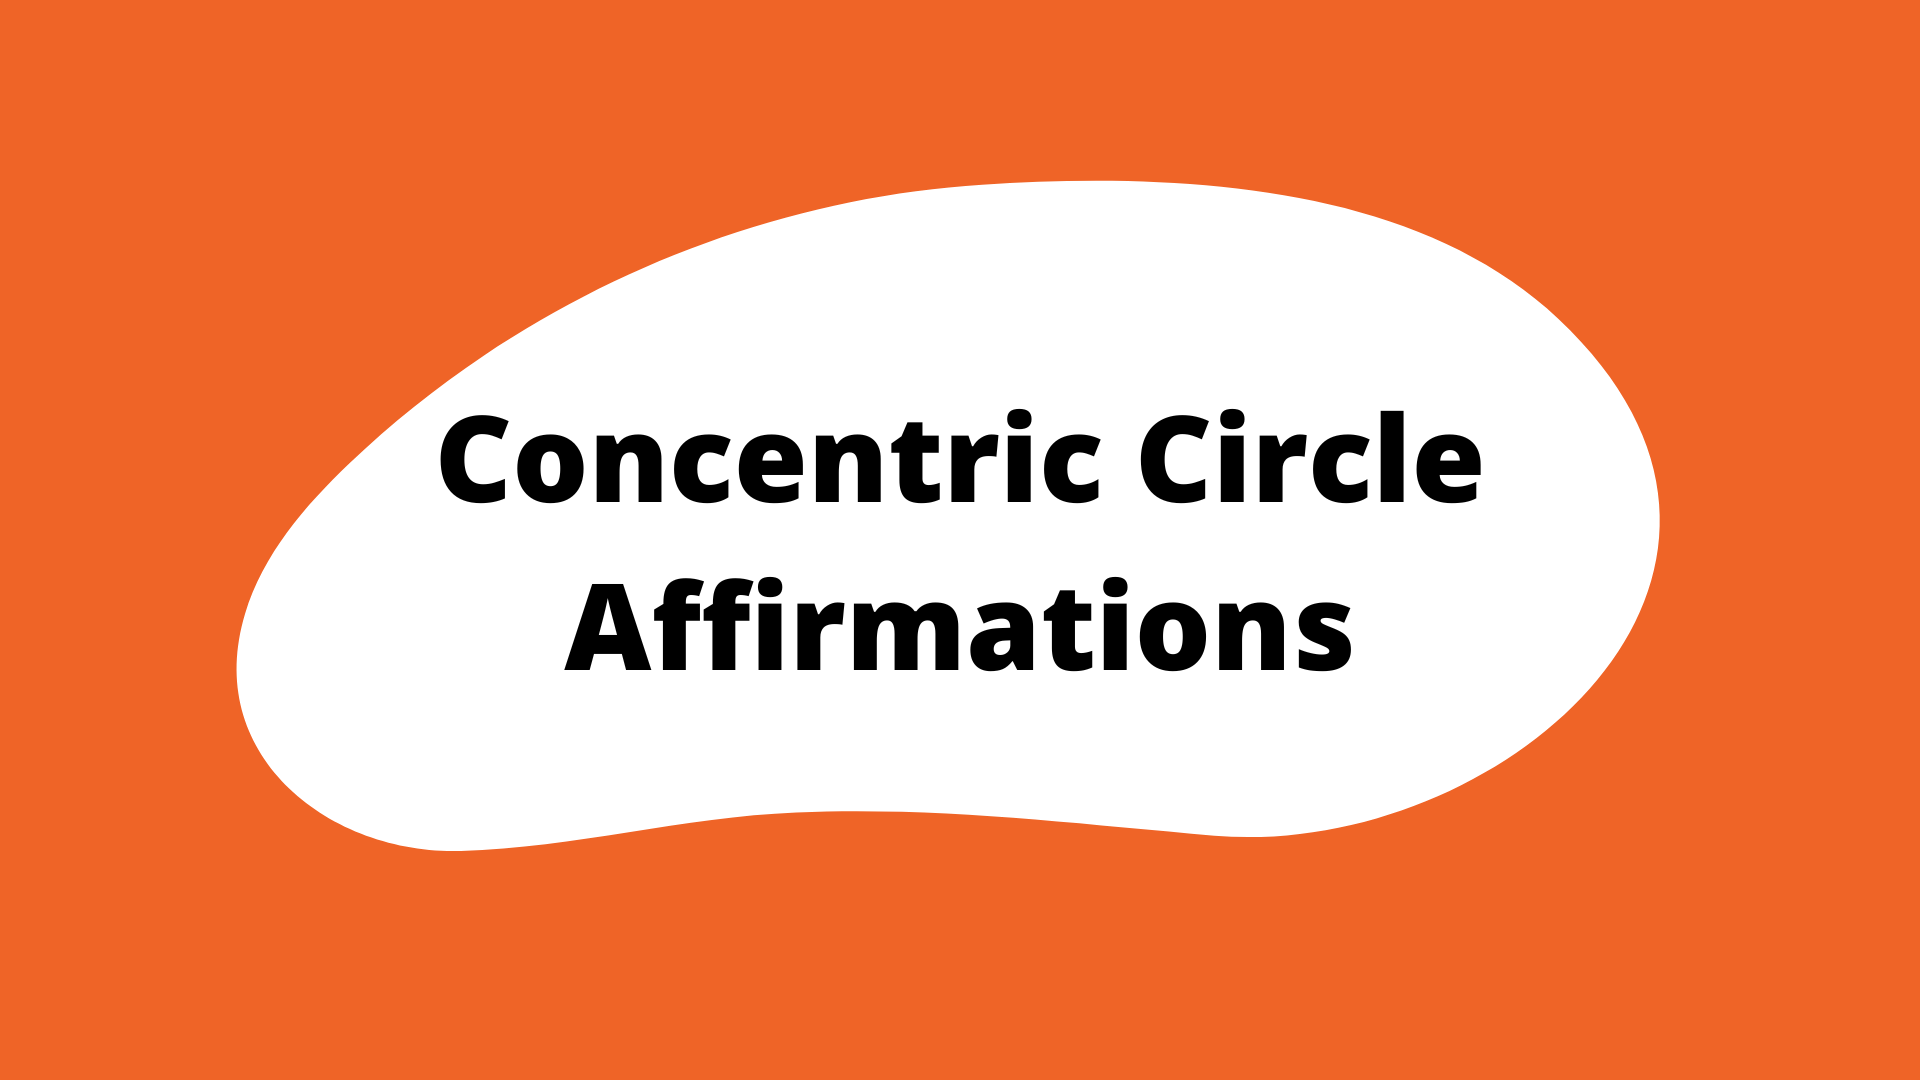 "Concentric circle affirmations" activity button. It is an orange square with a white blob in the center. The title is in the blob.